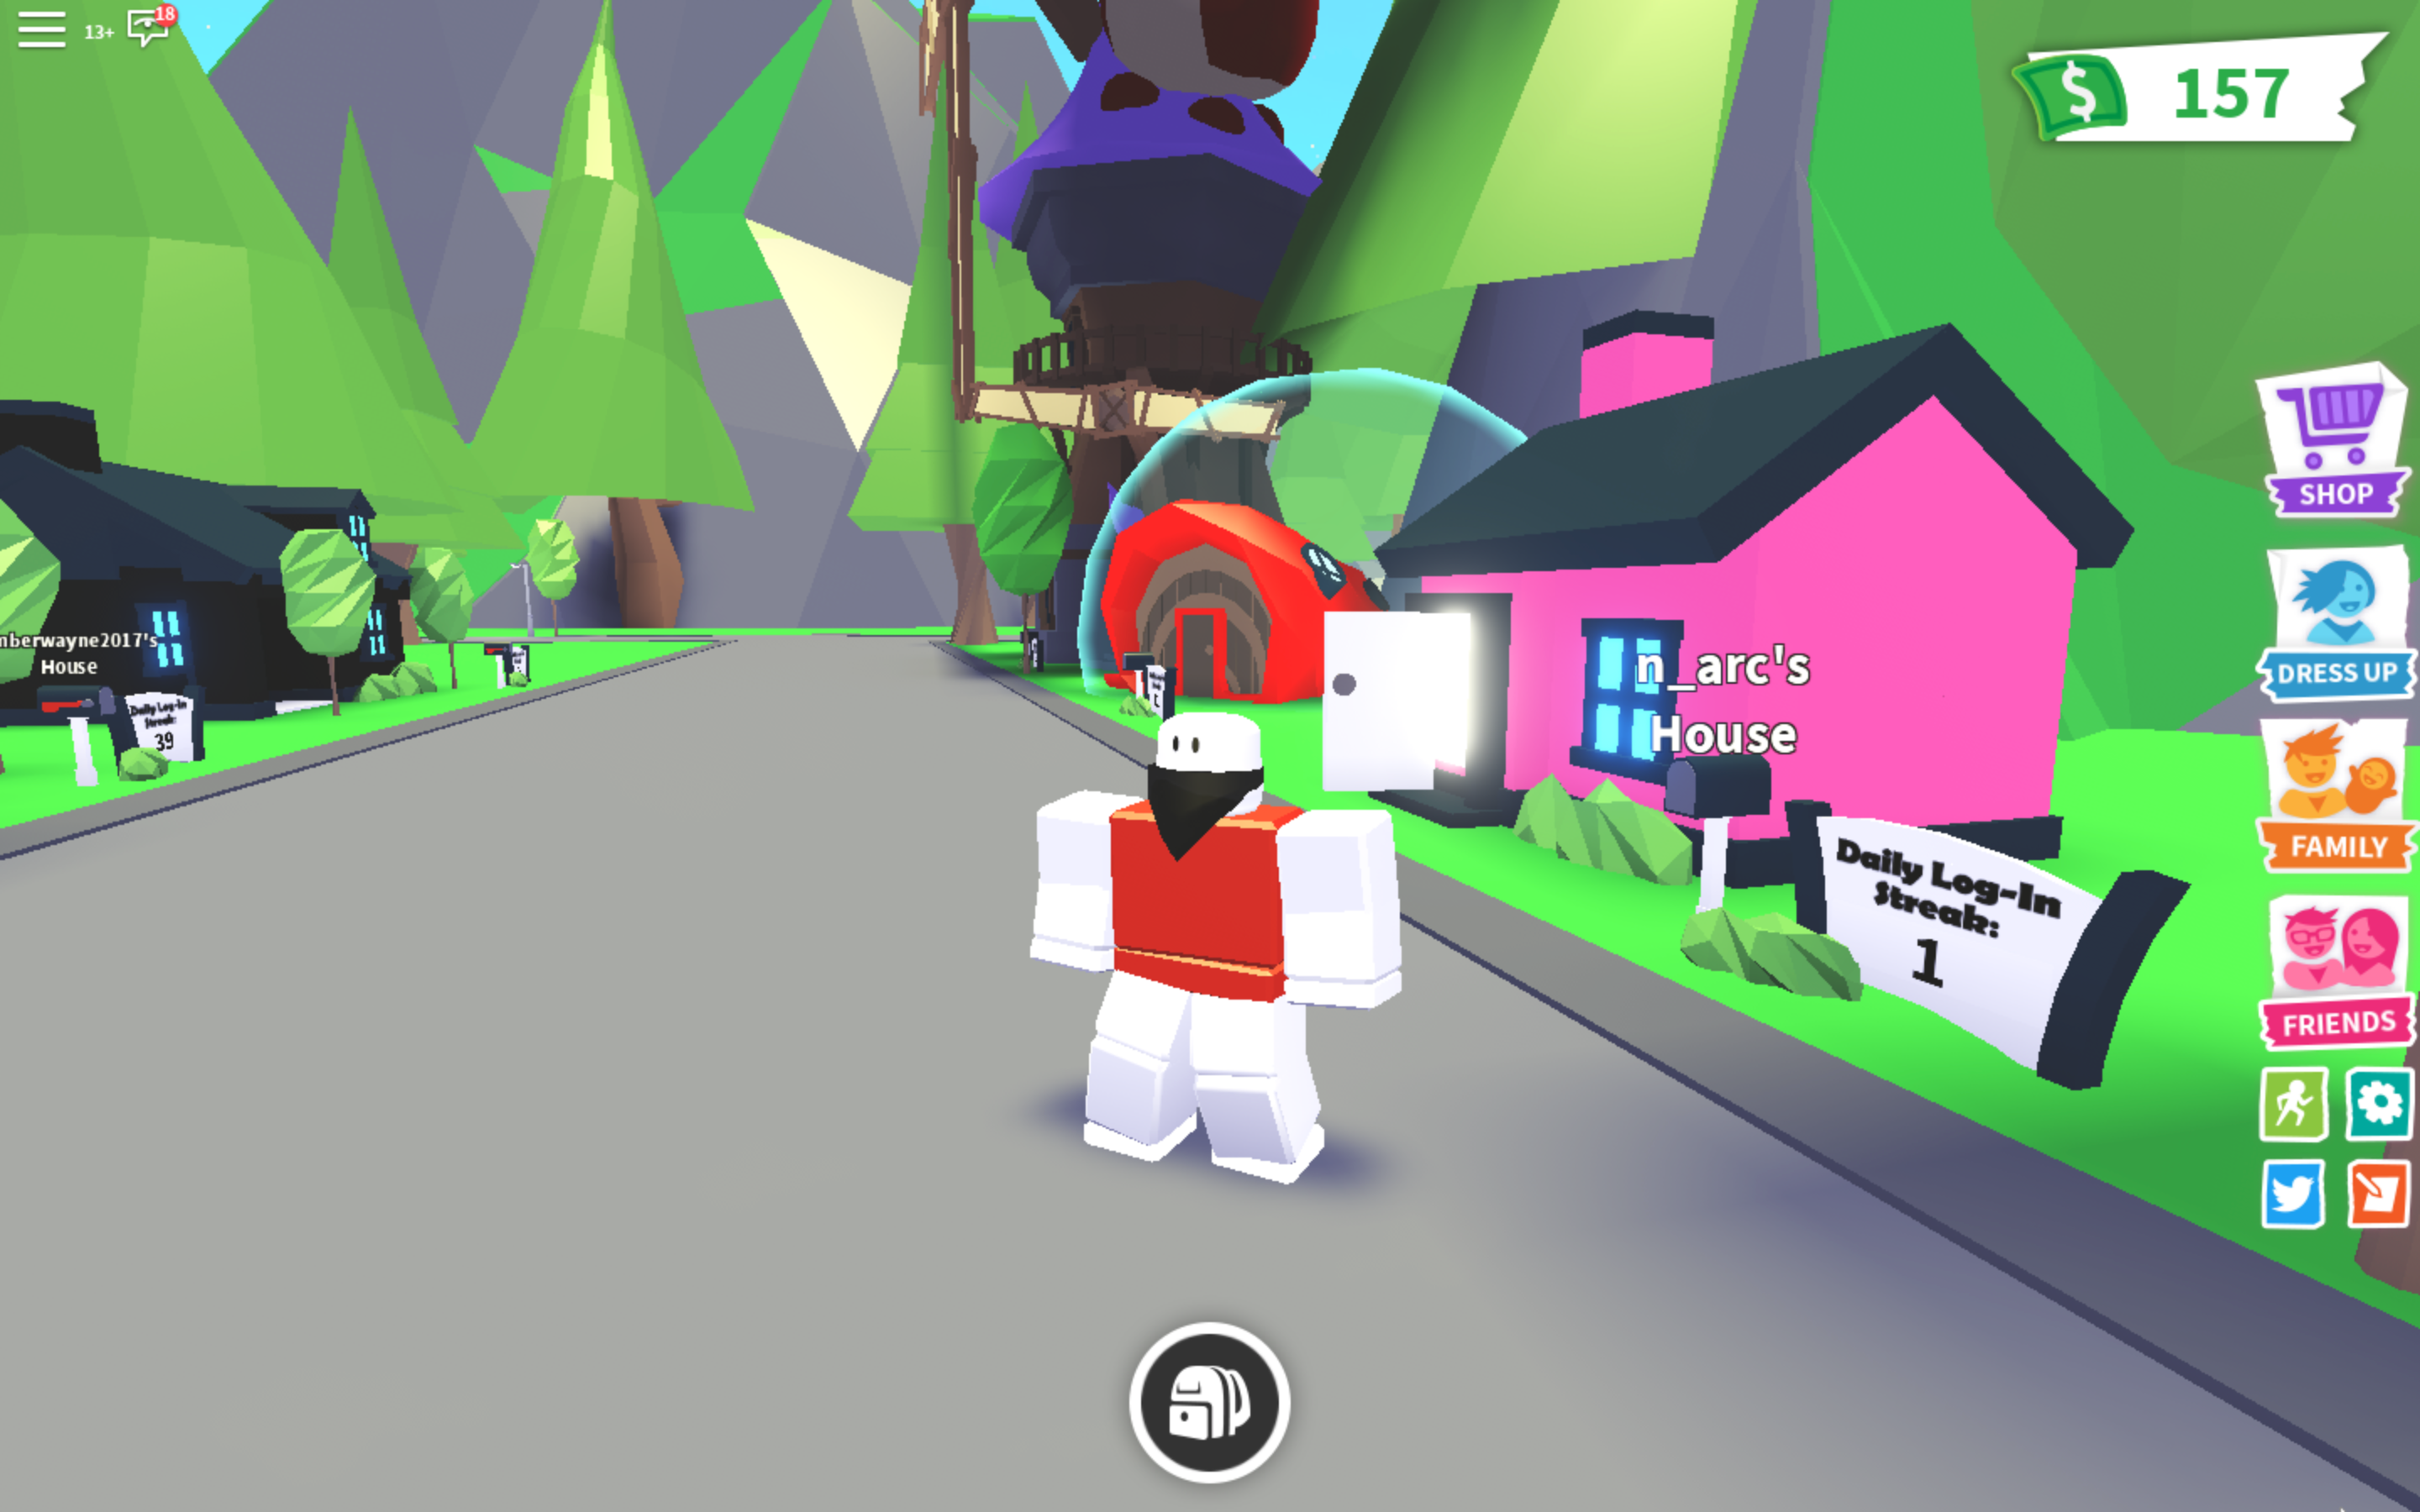 Game Review Adopt Me With A Cheerful And Delightful By N Arc Robloxradar Medium - most played roblox game